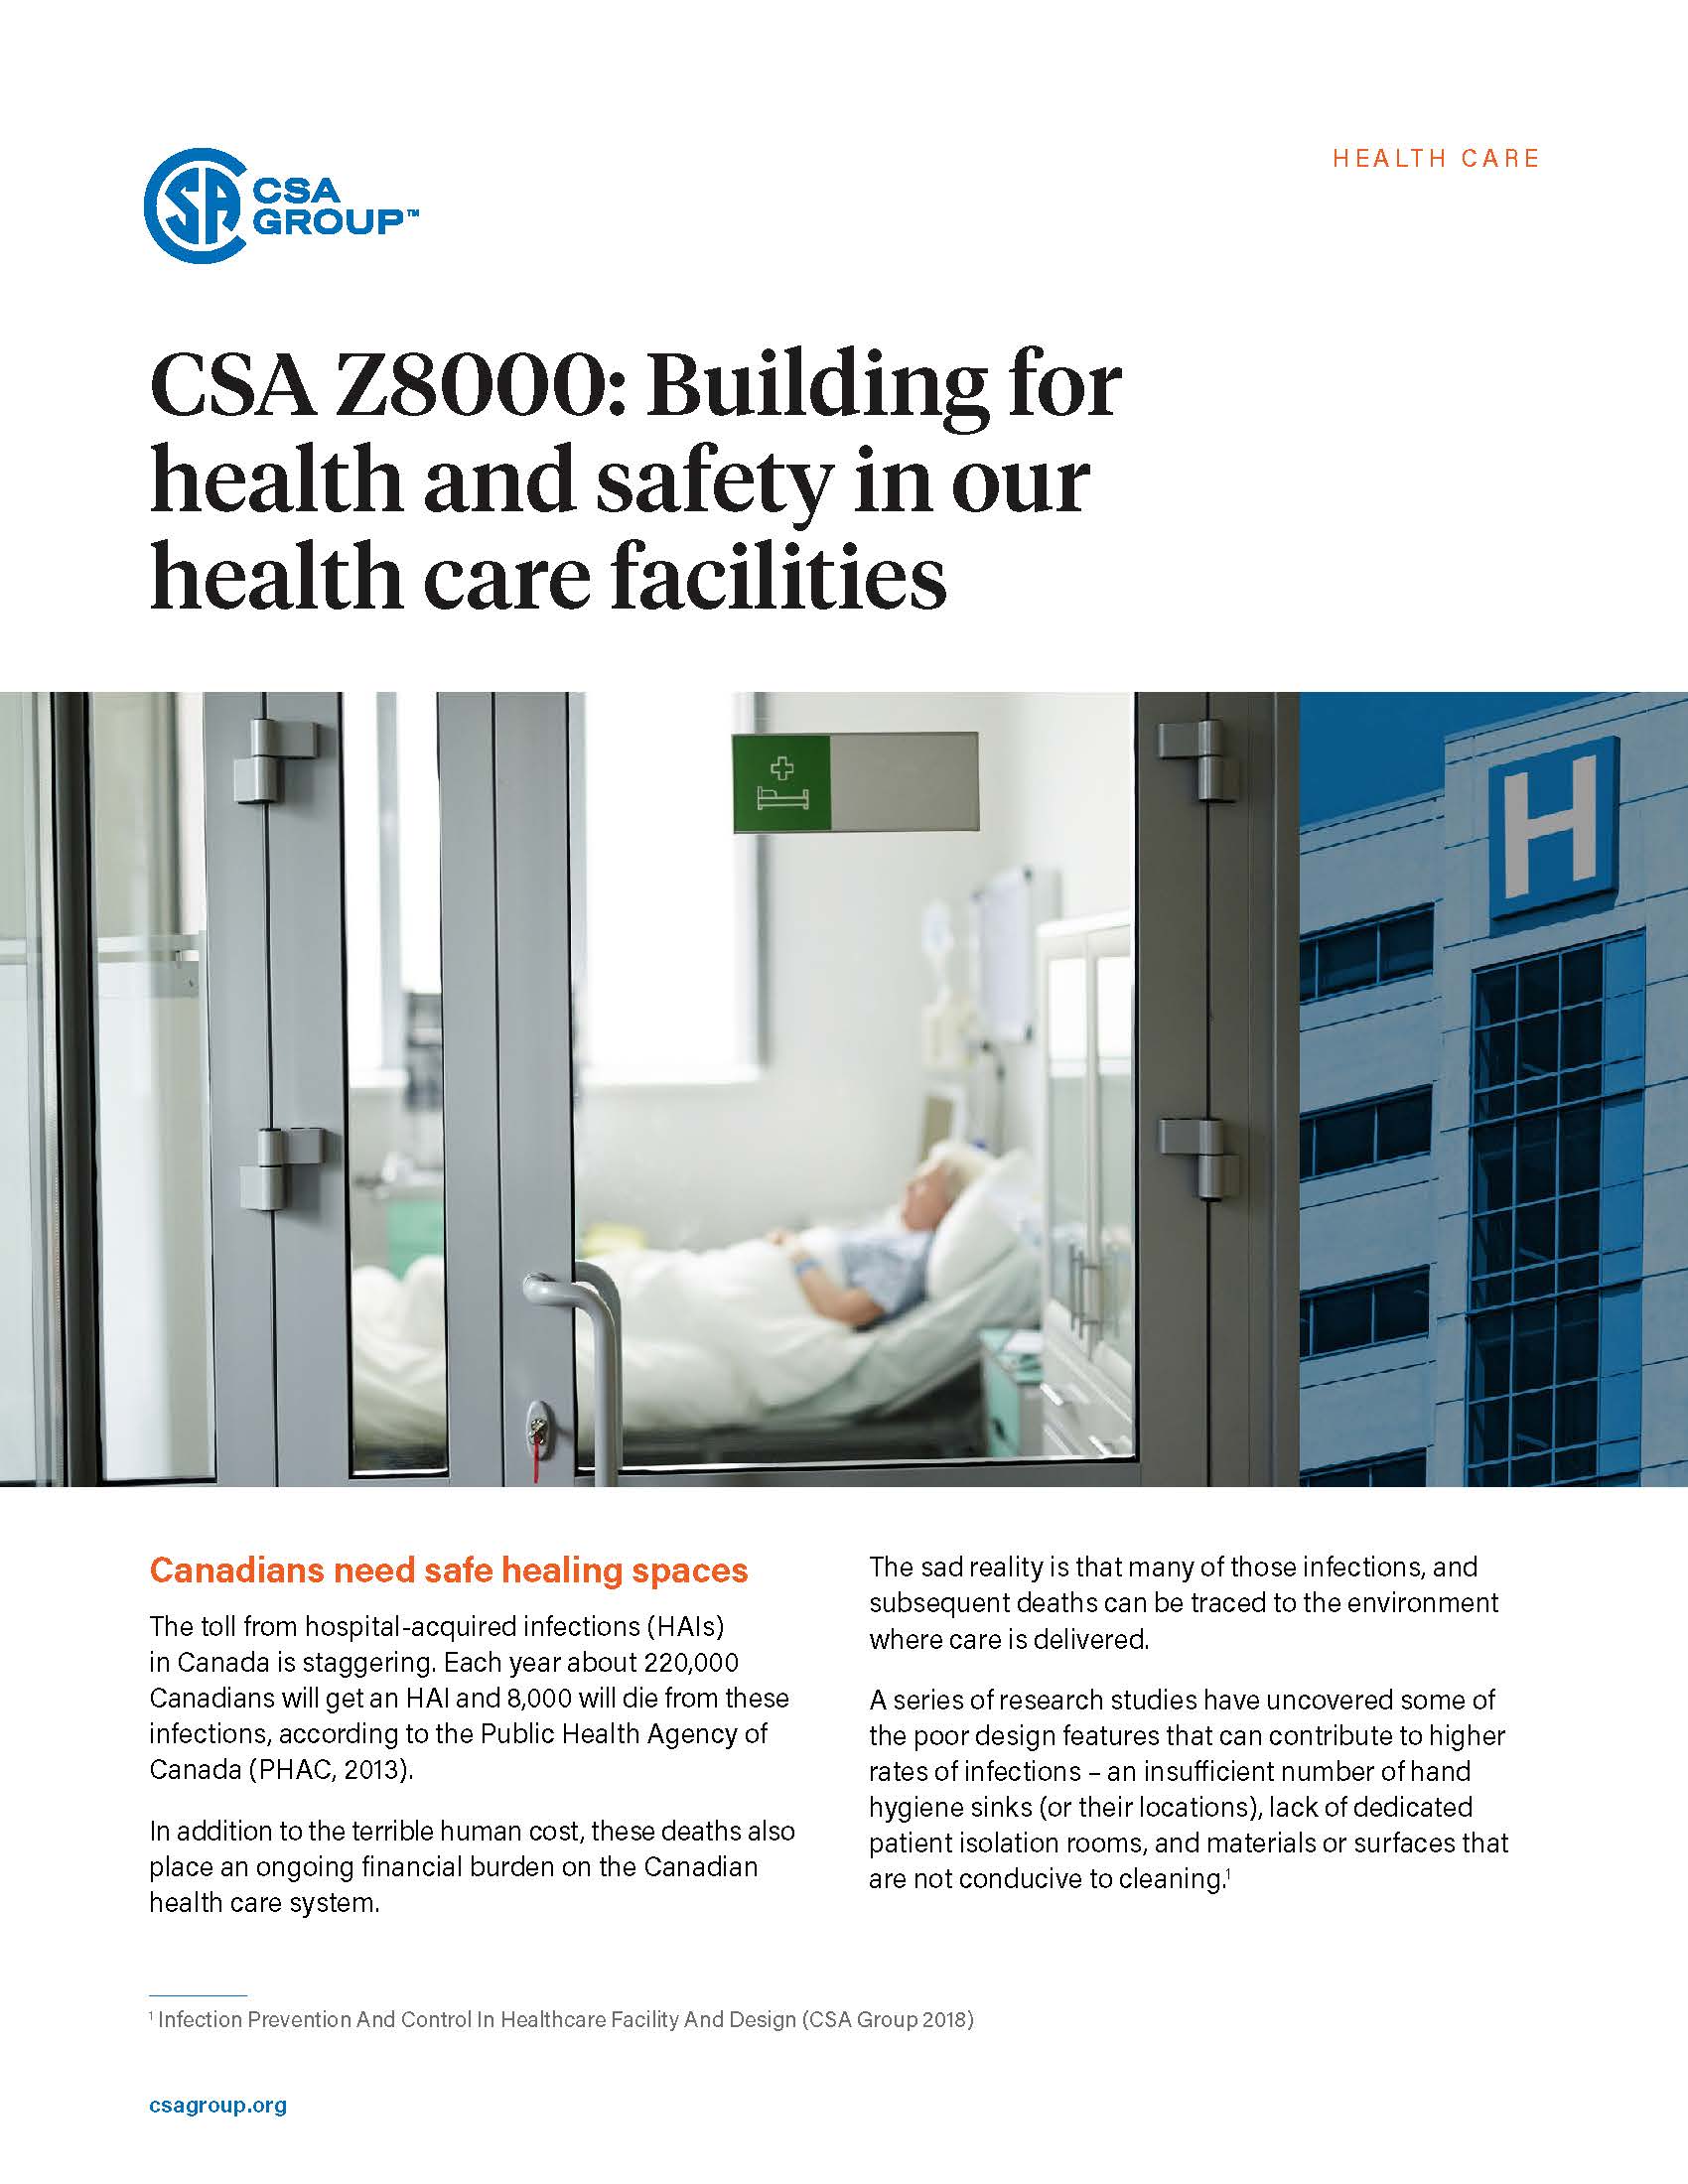 Featured Image. CSA Z8000: Building for health and safety in our health care facilities